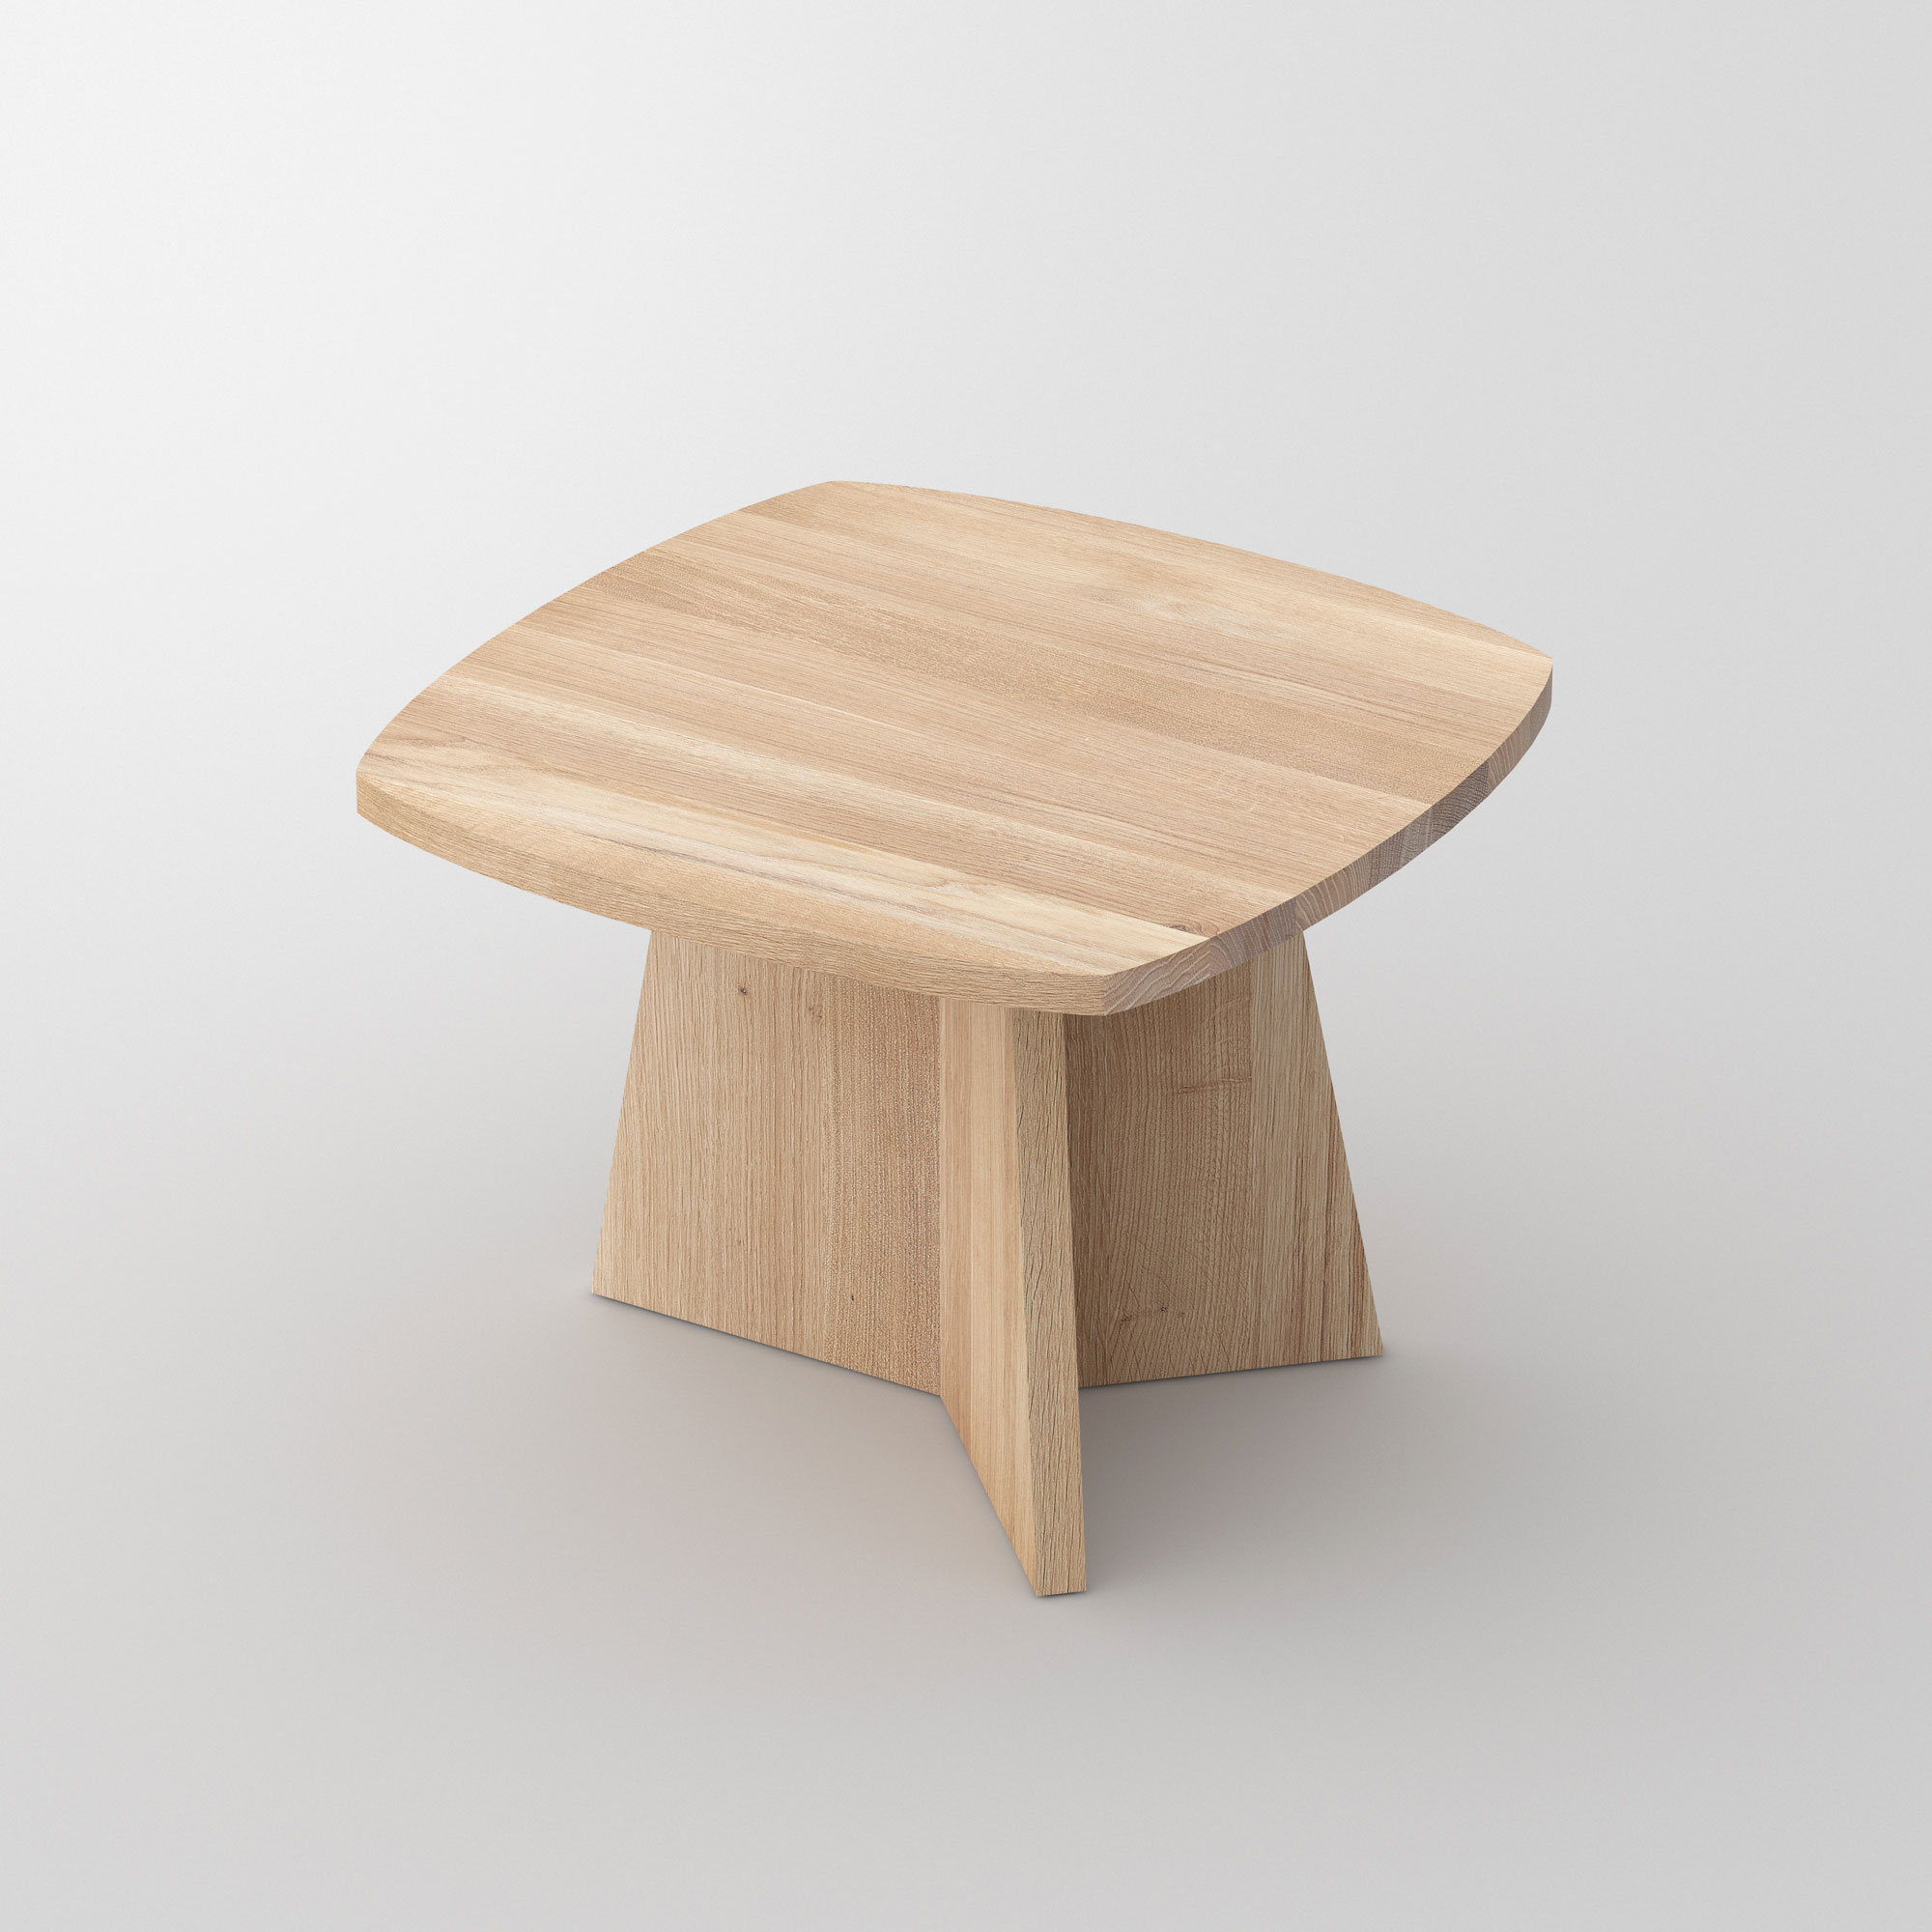  Coffee table LOTUS Y cam1 custom made in solid wood by vitamin design